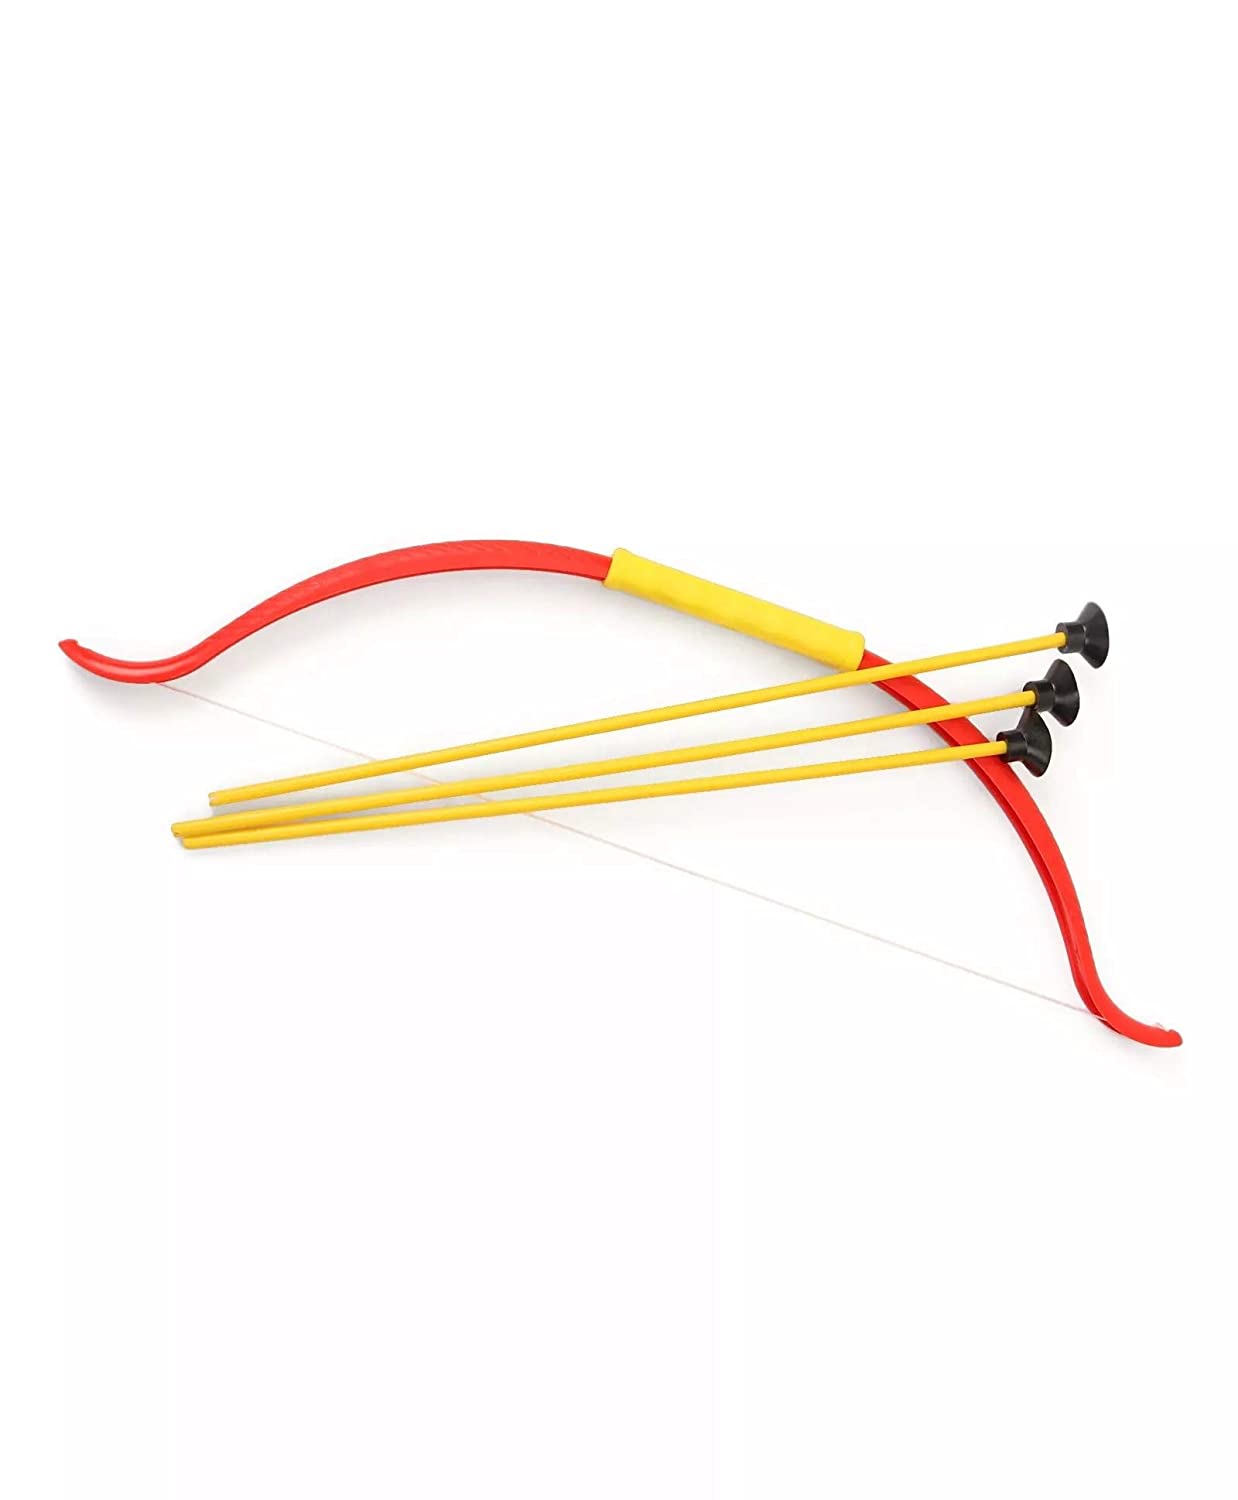 4621 Kids Archery Sport Bow and Arrow Toy Set with Quiver to Hold Arrows DeoDap